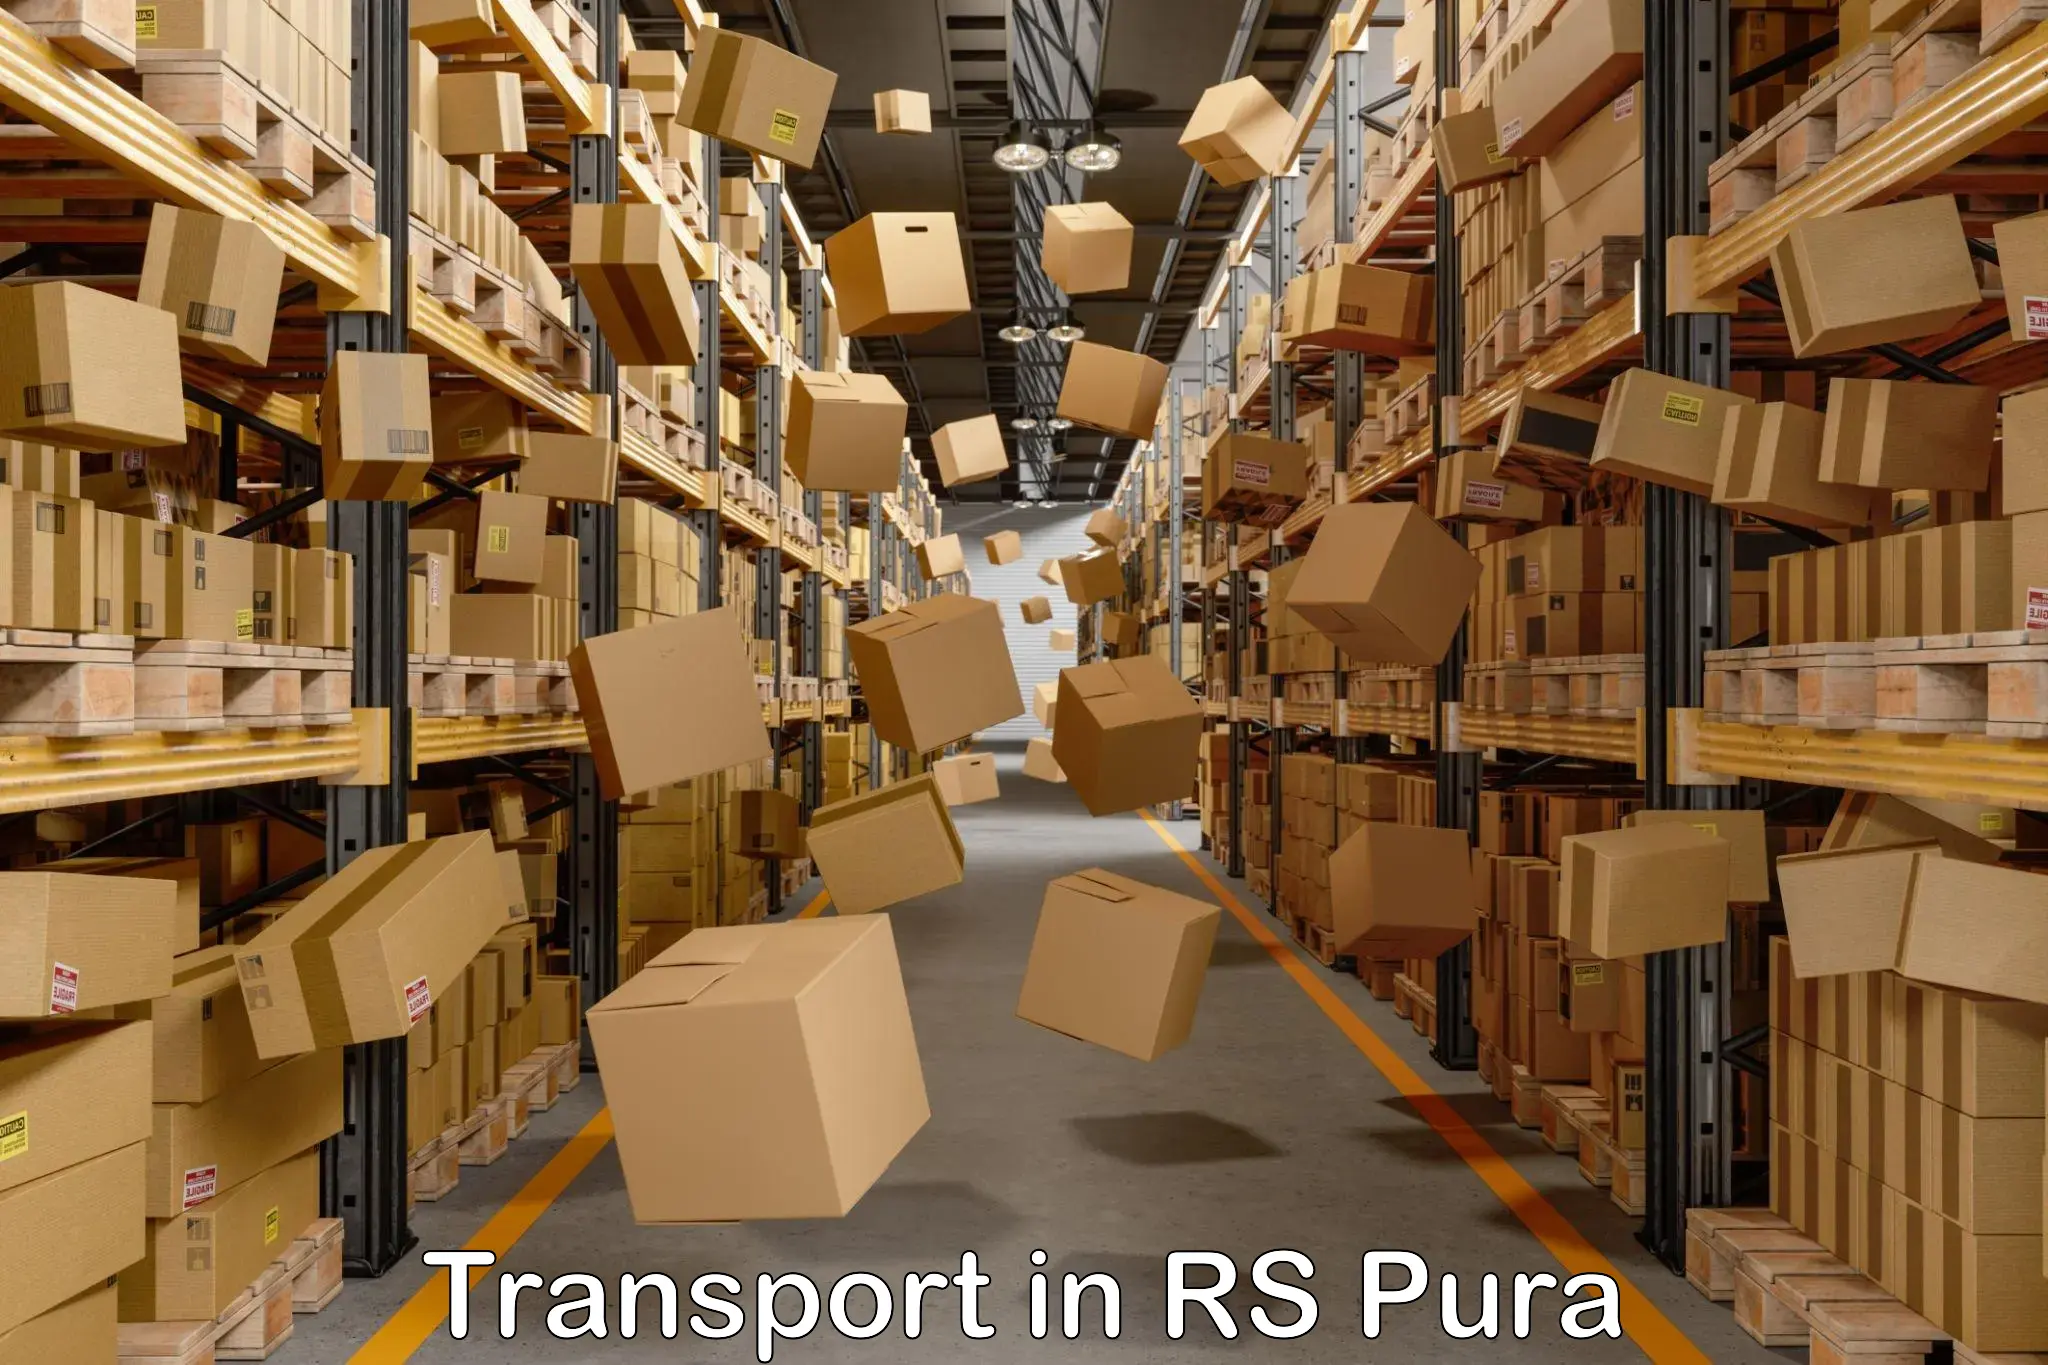 Interstate transport services in RS Pura